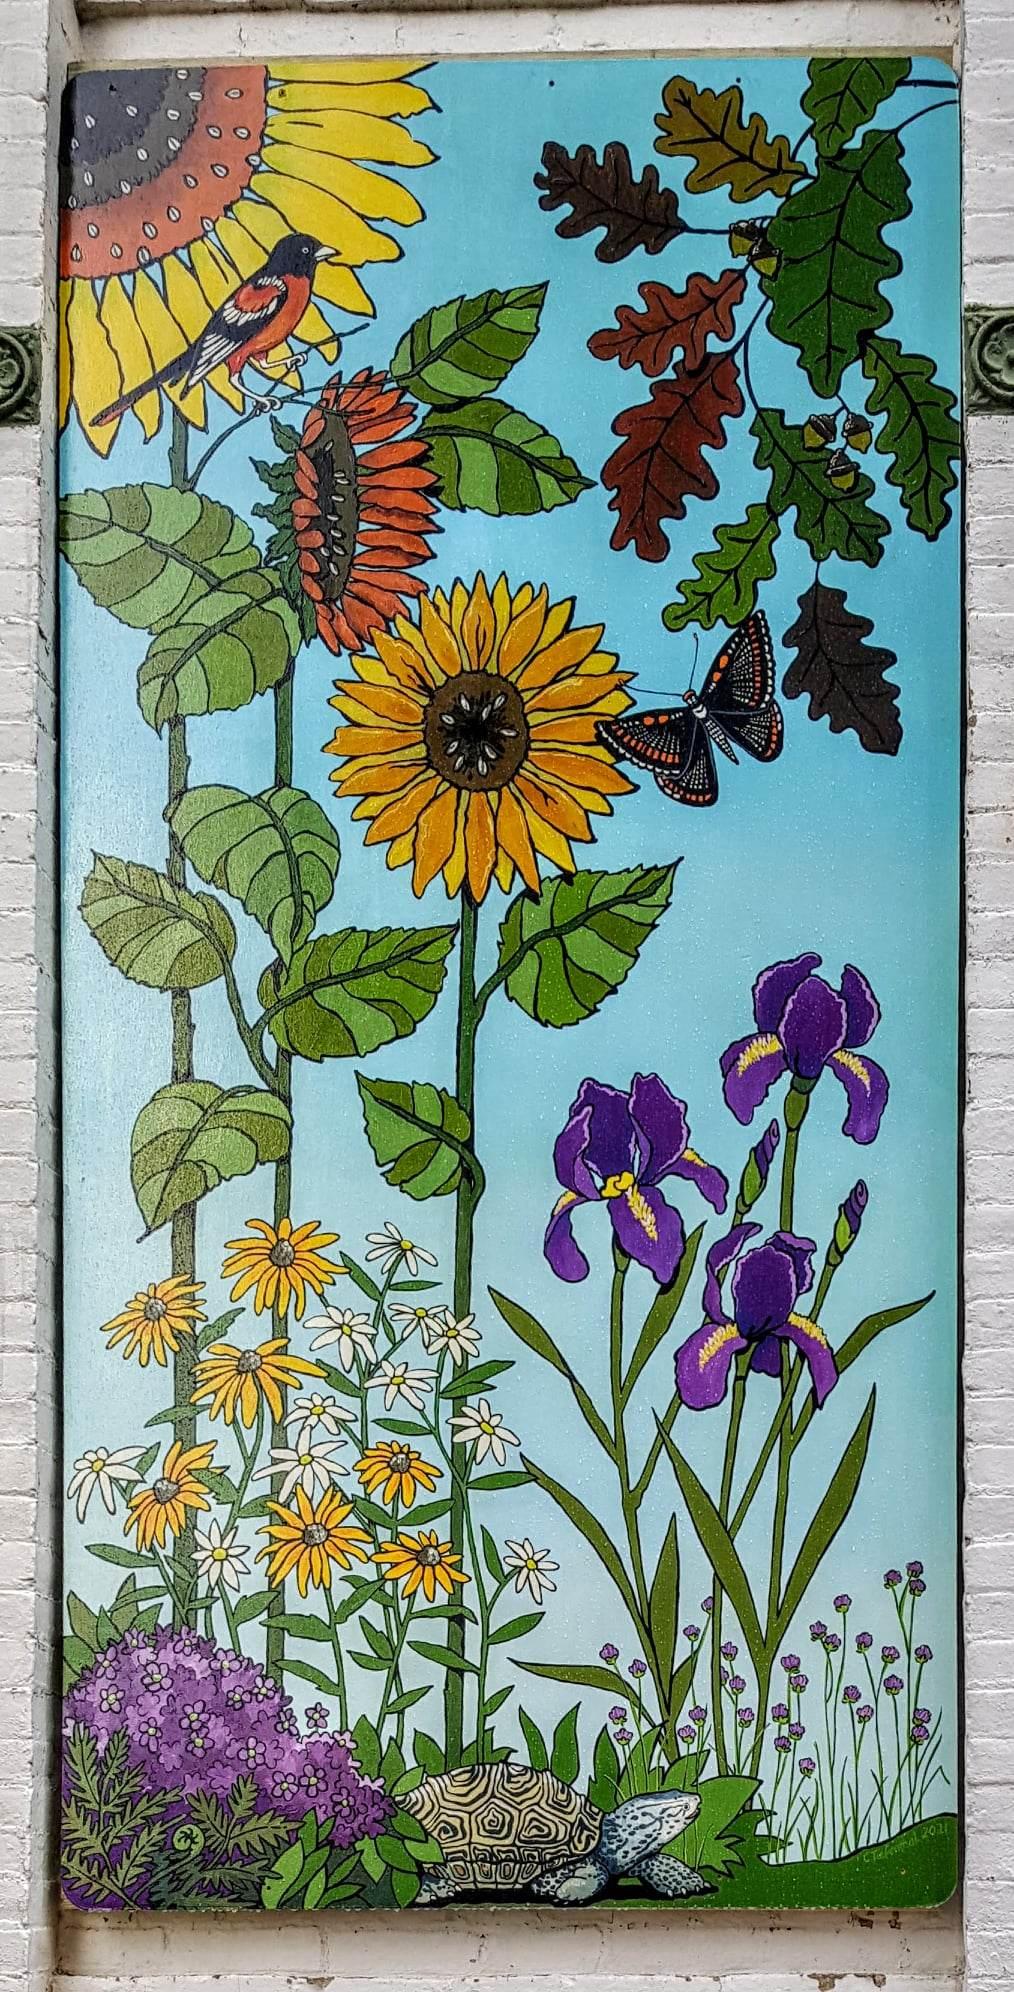 This outdoor mural depicts a garden scene highlighting Maryland. The checkerspot butterfly, Baltimore oriole, diamondback terrapin, white oak, and black-eyed susans are all Maryland state items. The other plants and flowers are found in the garden behind the building where the piece is permanently installed, the Cecil County Arts Council building in downtown Eklton, for public display.